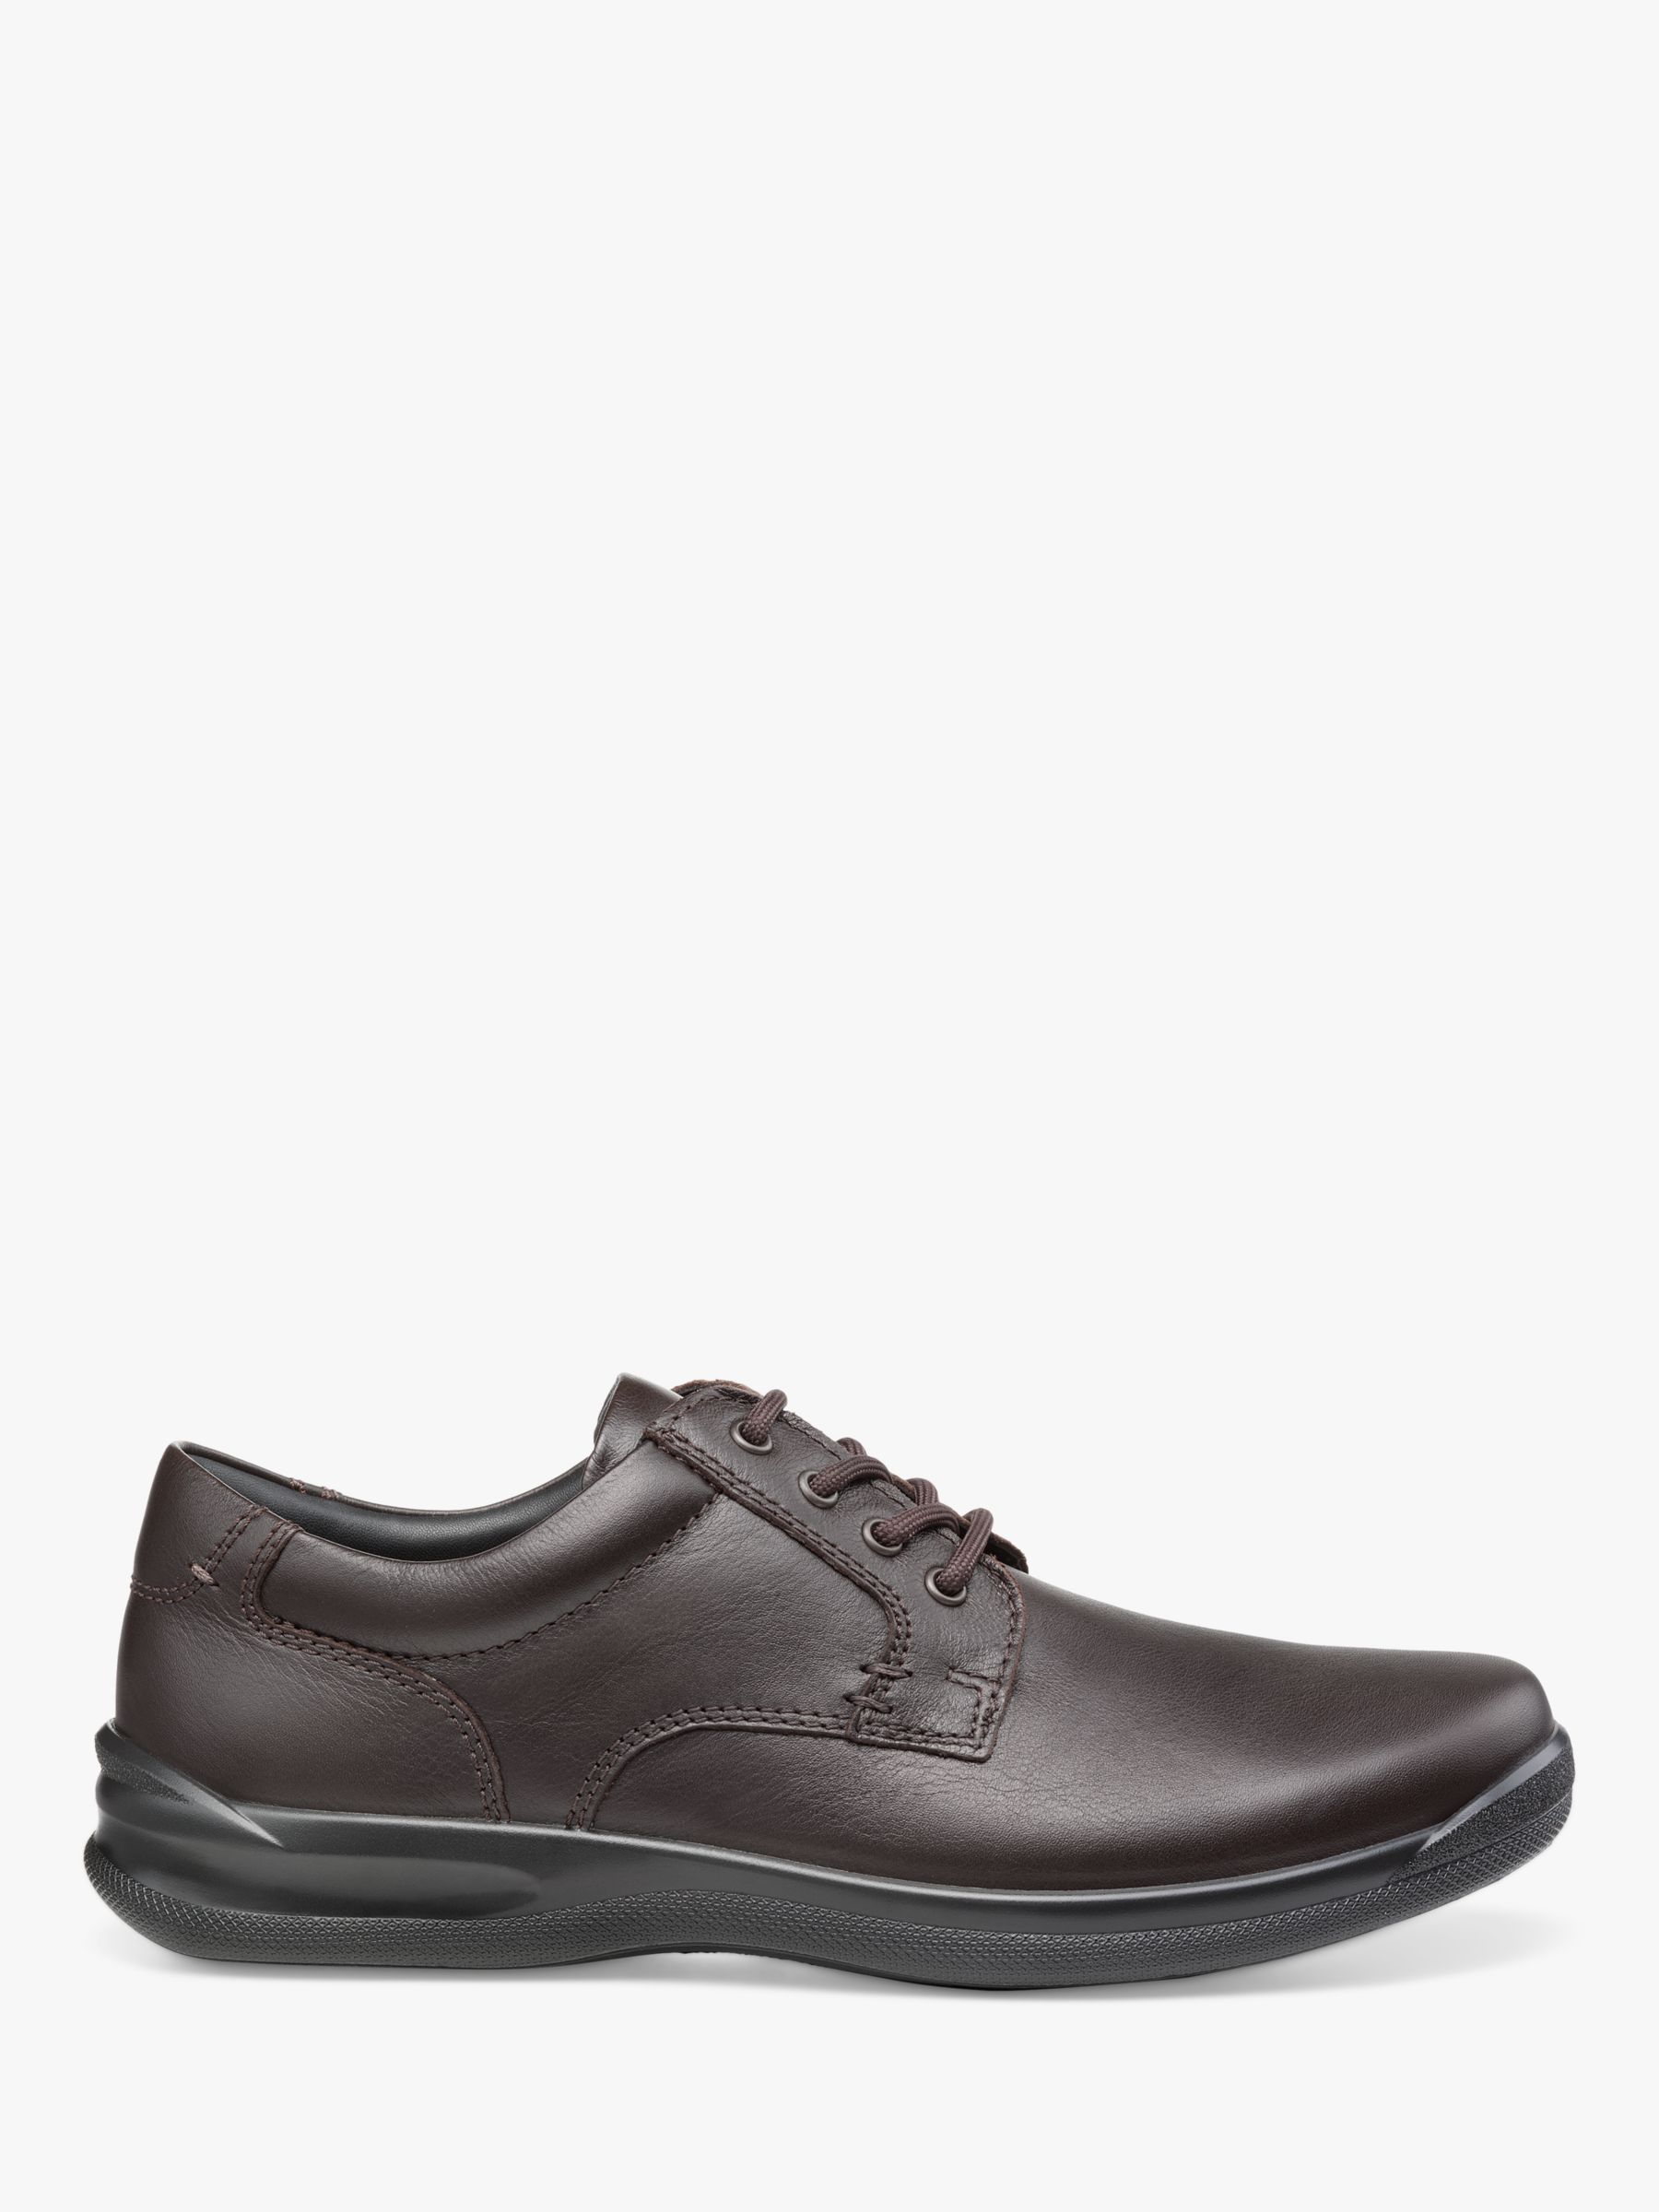 Hotter Burton II Classic Leather Lace-Up Derby Shoes, Dark Brown, 6S